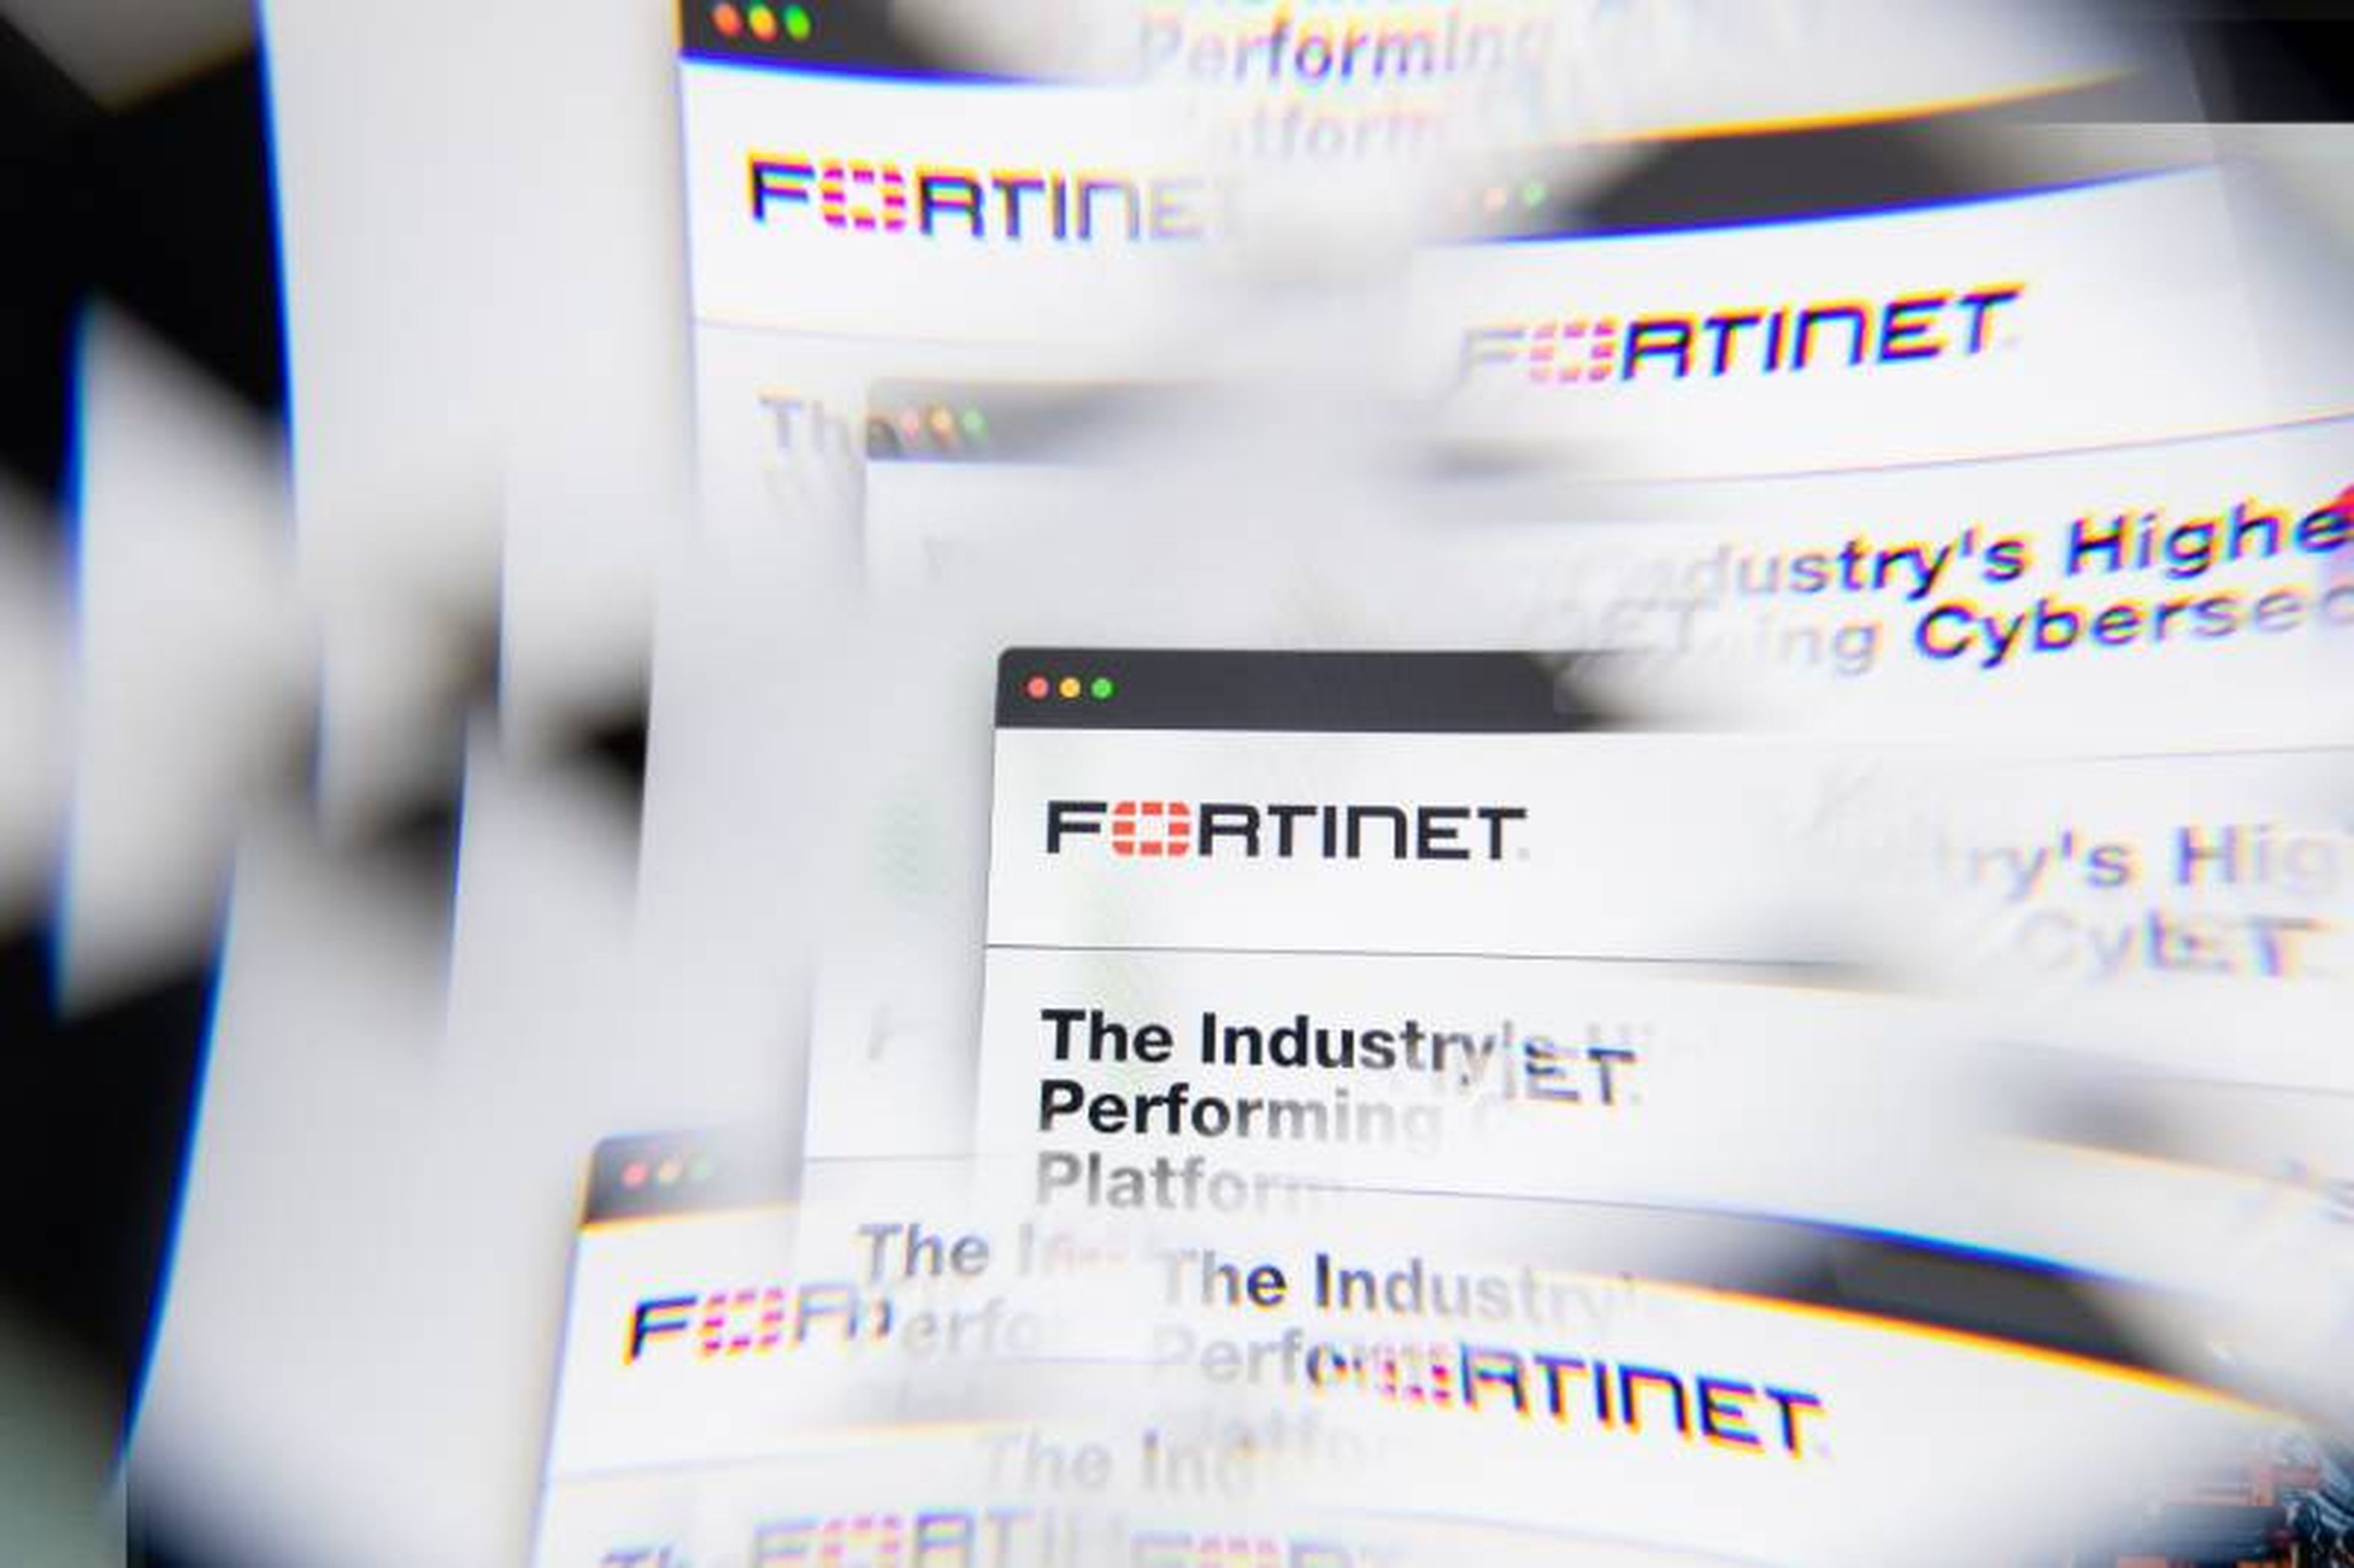 Fortinet disclosed four critical vulnerabilities this week, including one RCE bug &#8220;potentially being exploited in the wild.&#8221; (Credit: Casimiro &#8211; stock.adobe.com)